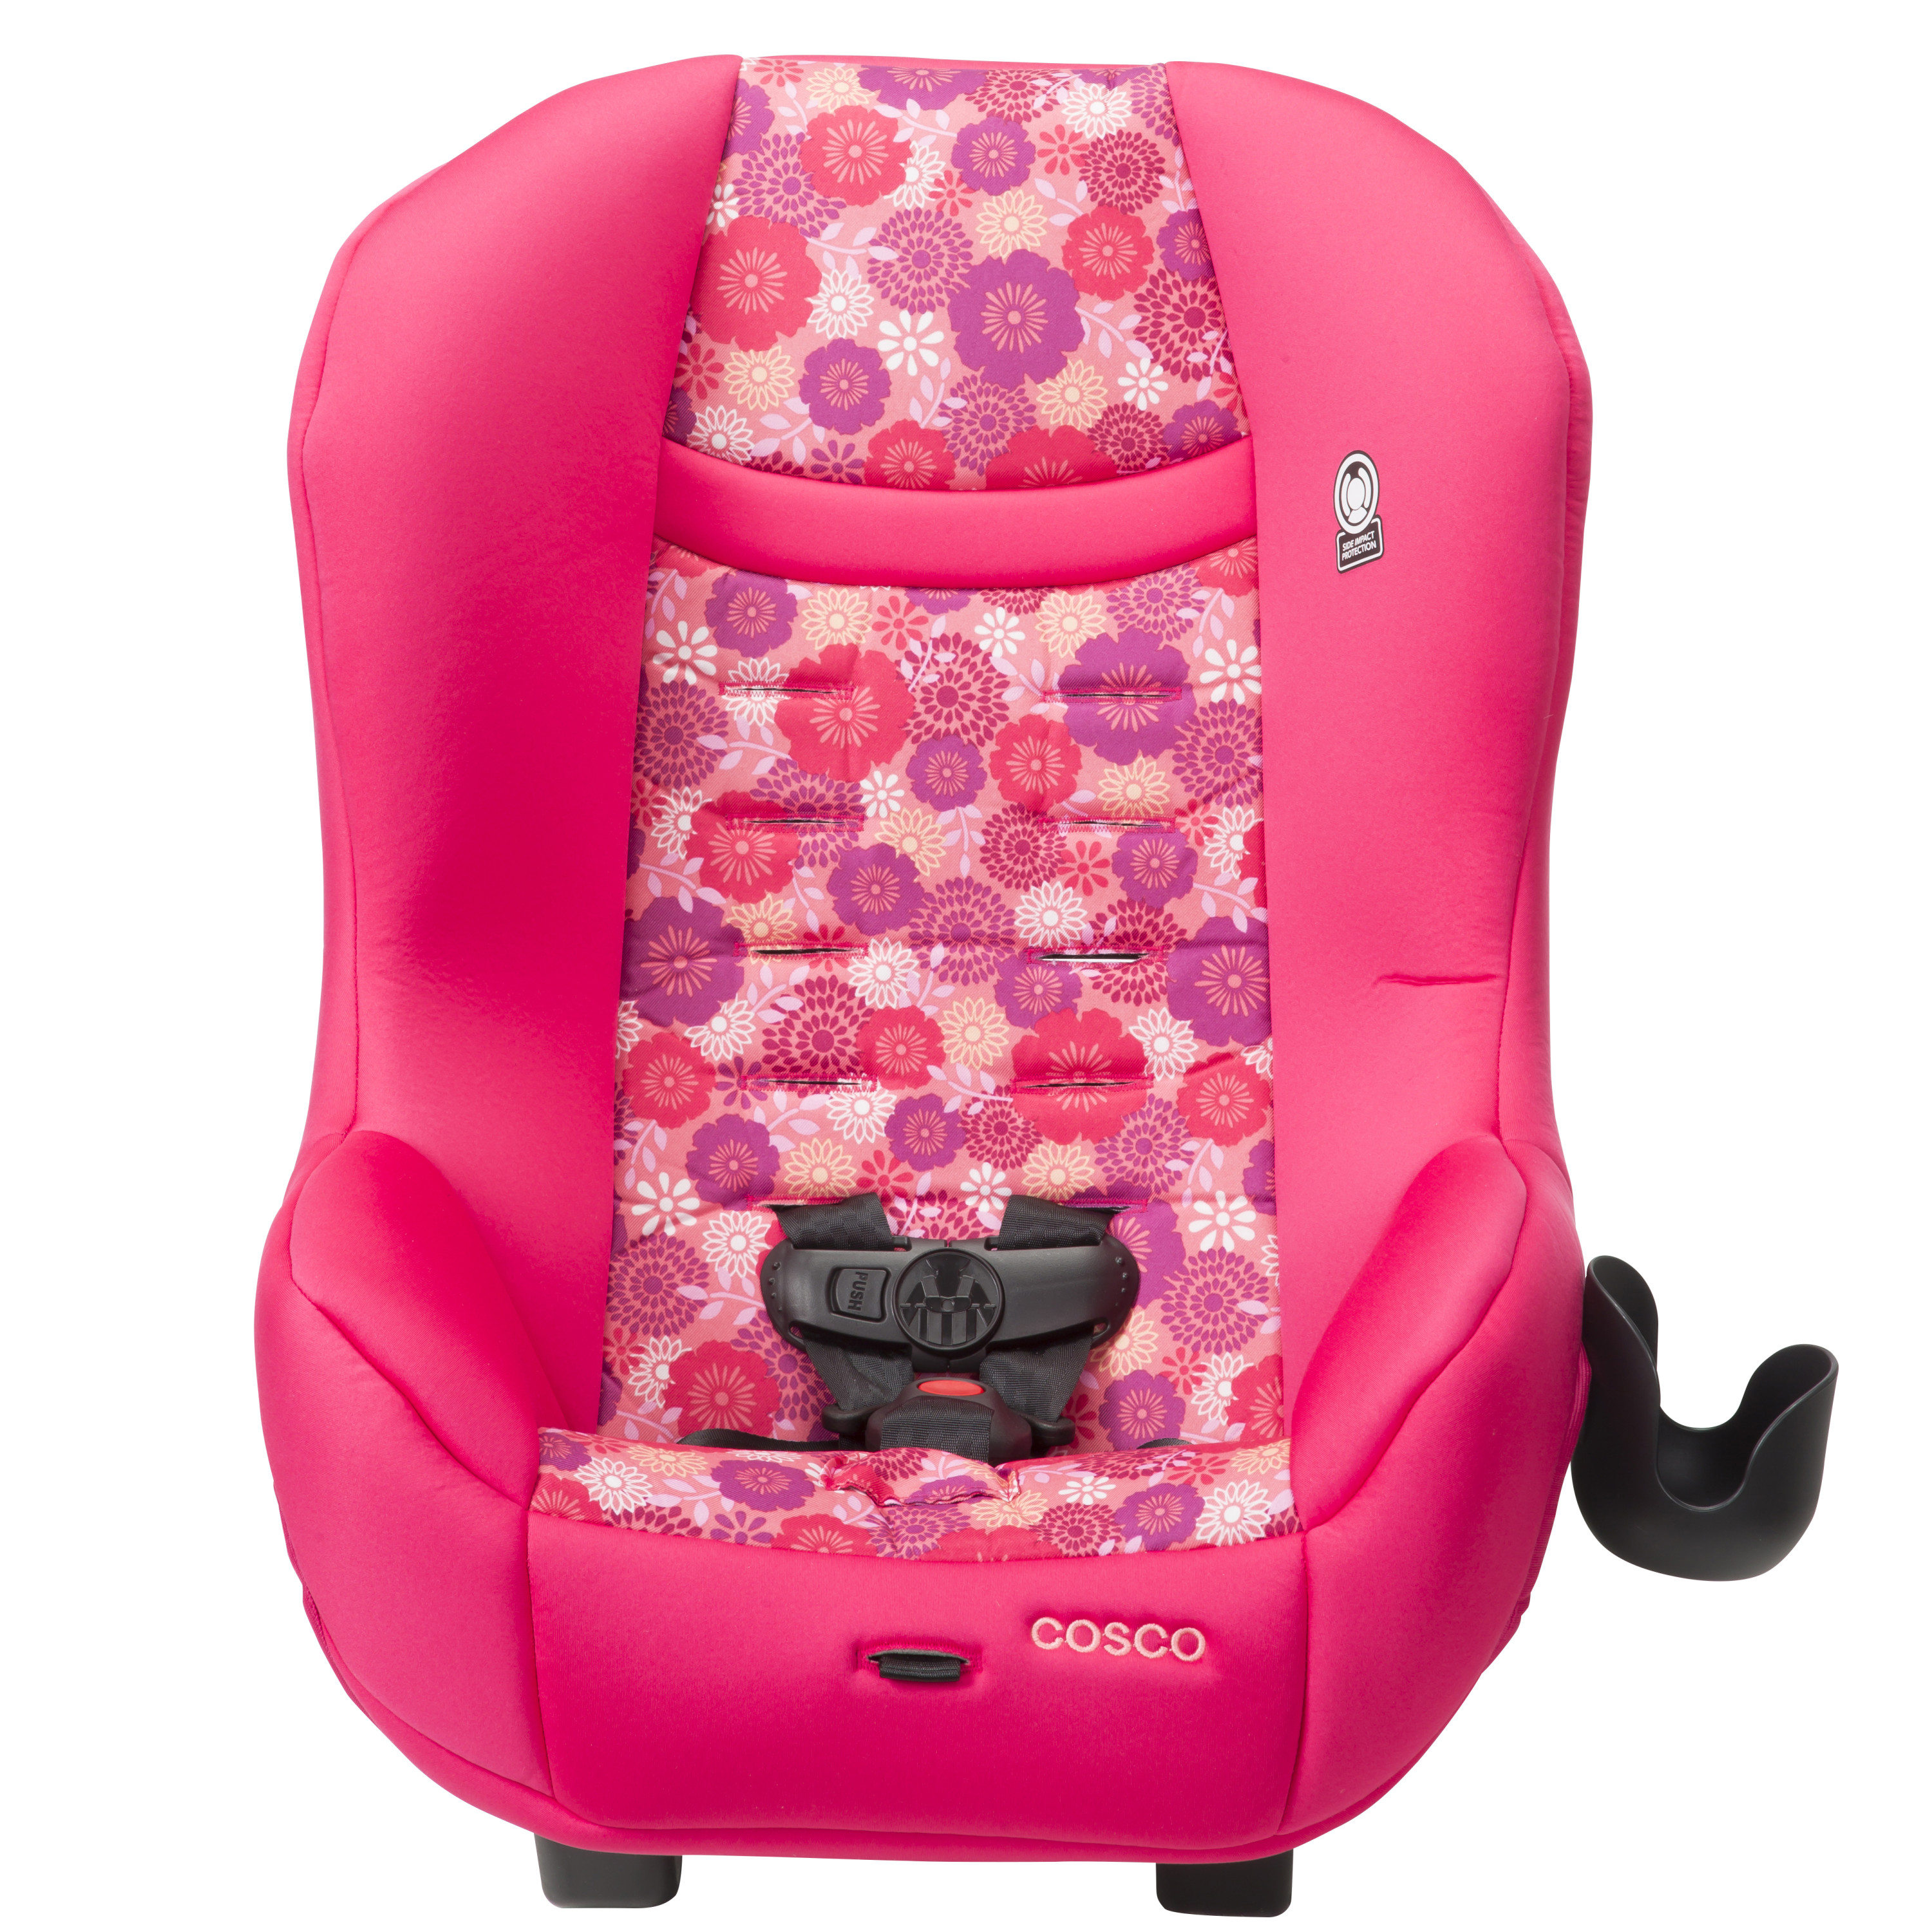 Cosco Scenera Convertible Car Seat, Floral Orchard Blossom Pink - image 3 of 13